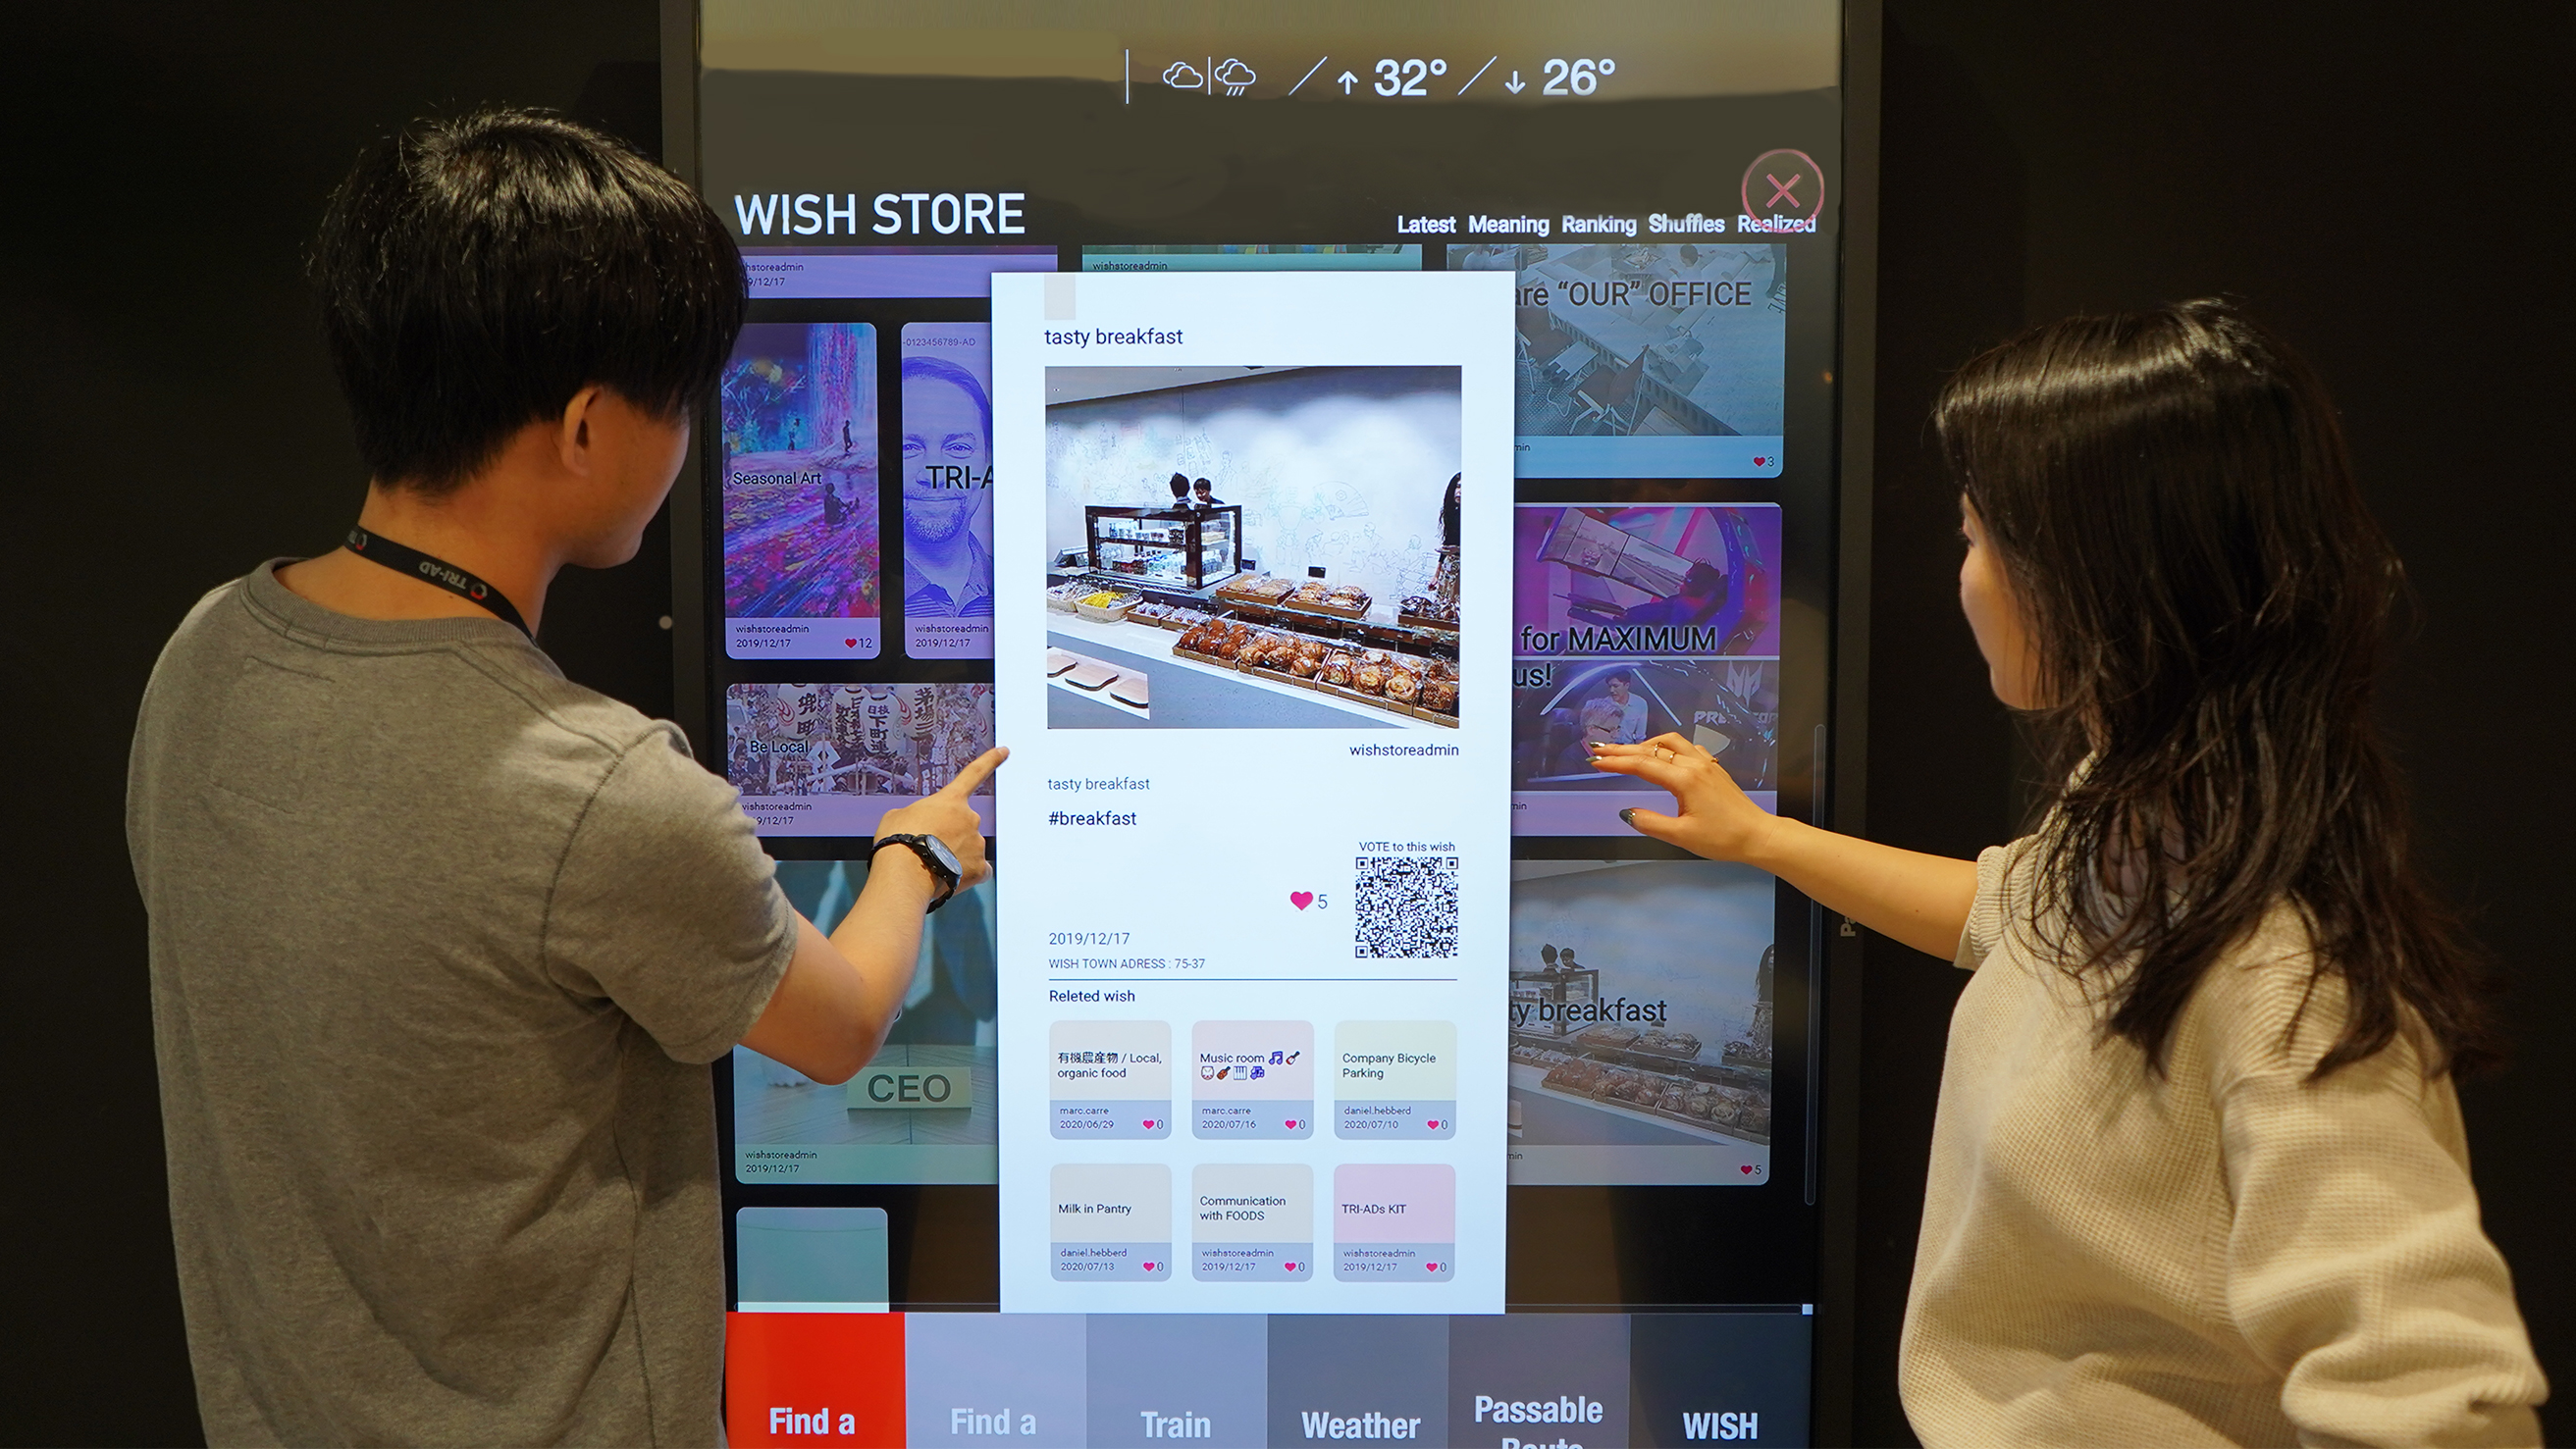 Two TRI-AD employees are interacting with a large touchscreen display labeled "Wish Store" in the office. They are pointing at a digital profile of a bakery with an image of pastries. The screen also shows buttons for "Find a Train," "Weather," and other services.